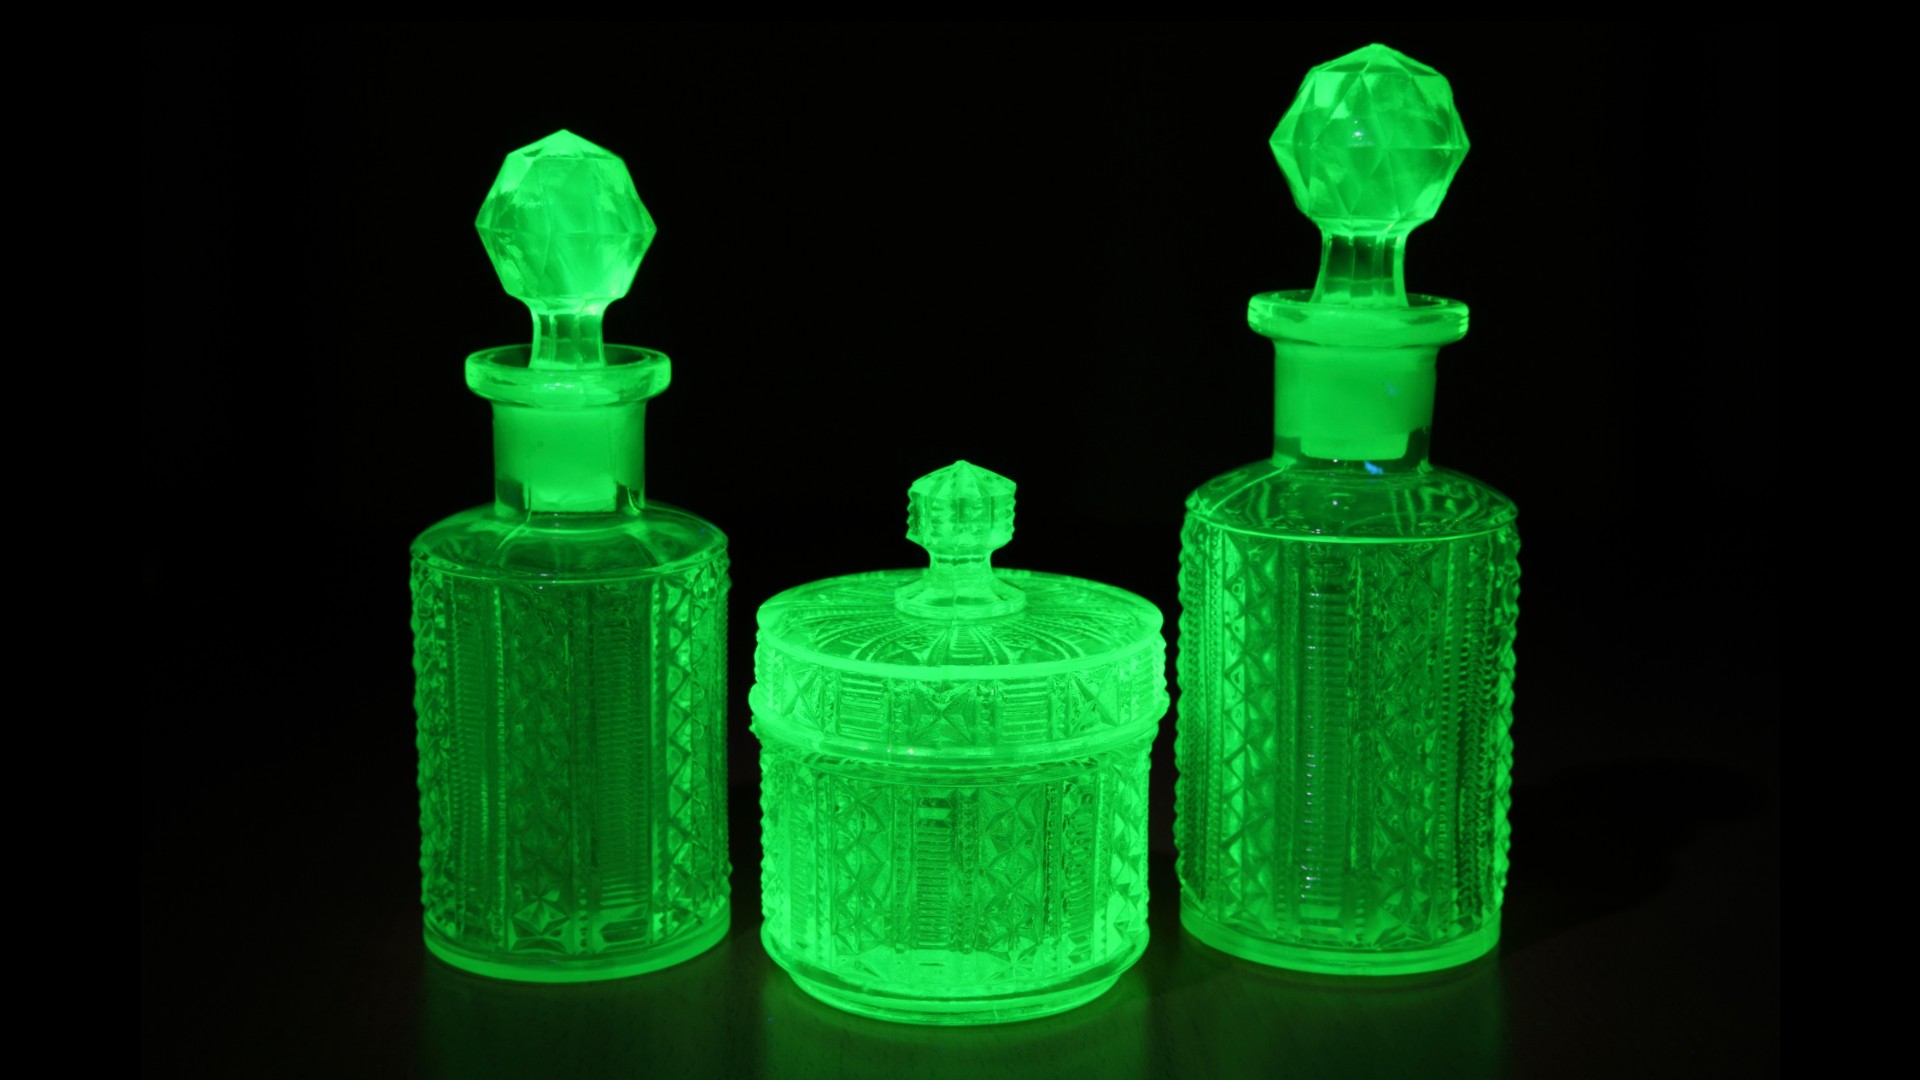 Art deco molded green uranium glass lit by UV light on a table. The uranium glows green with fluorescence._Peter Chow UK via Shutterstock